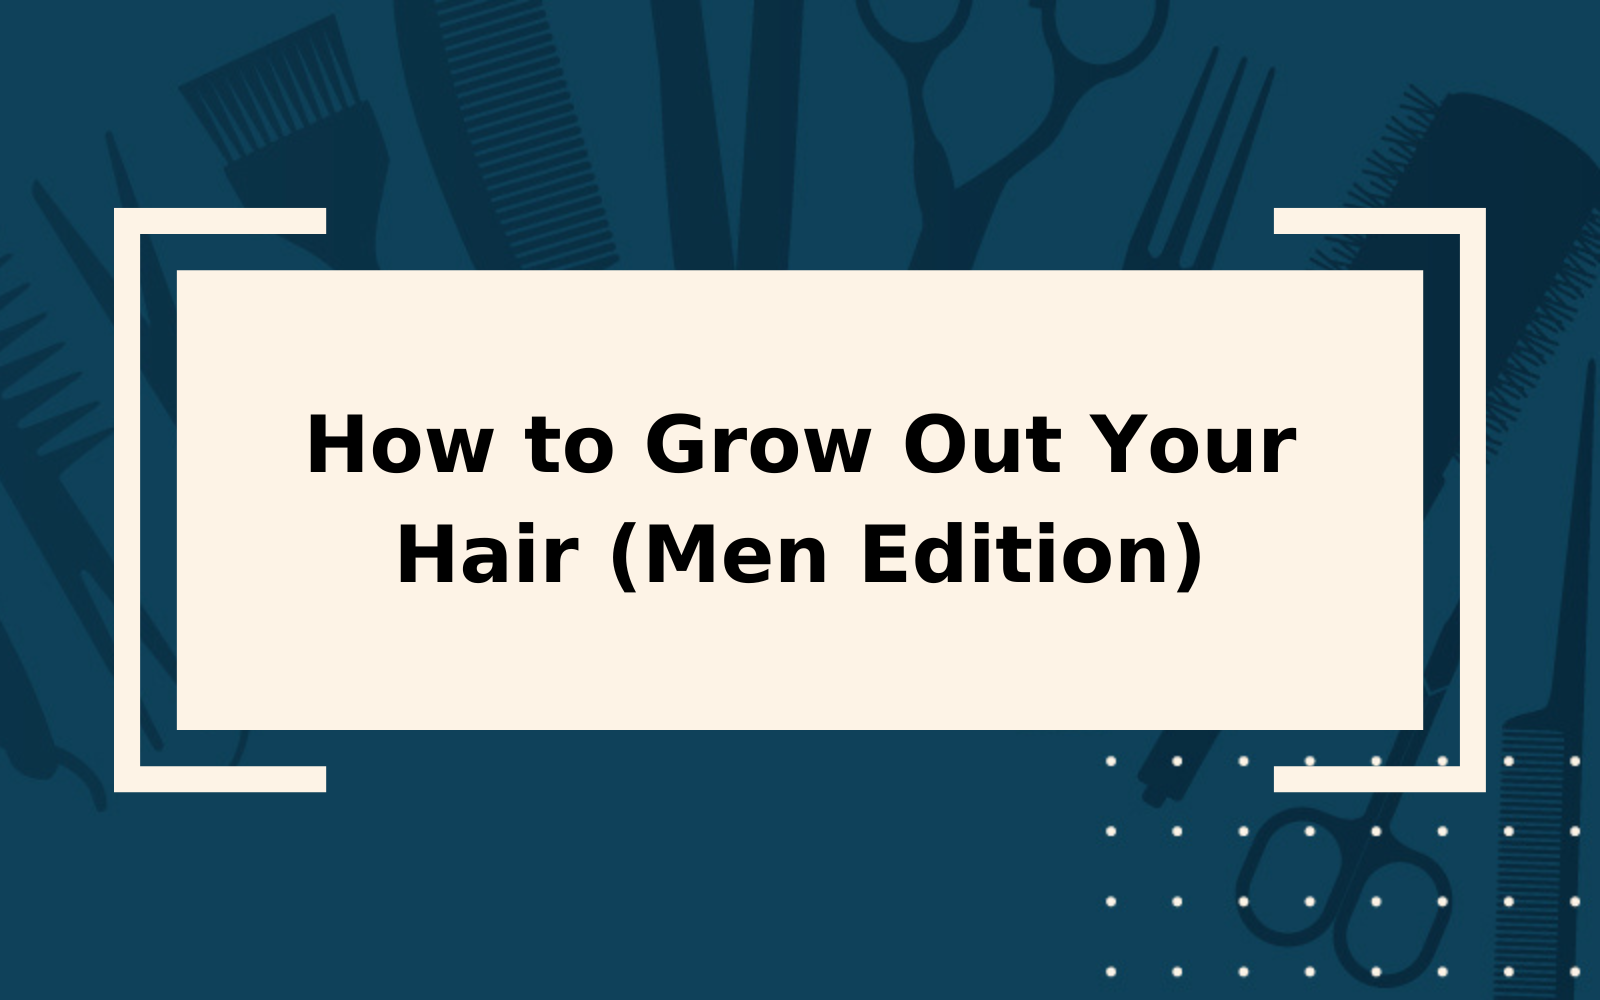 How to Grow Out Your Hair (Men Edition)